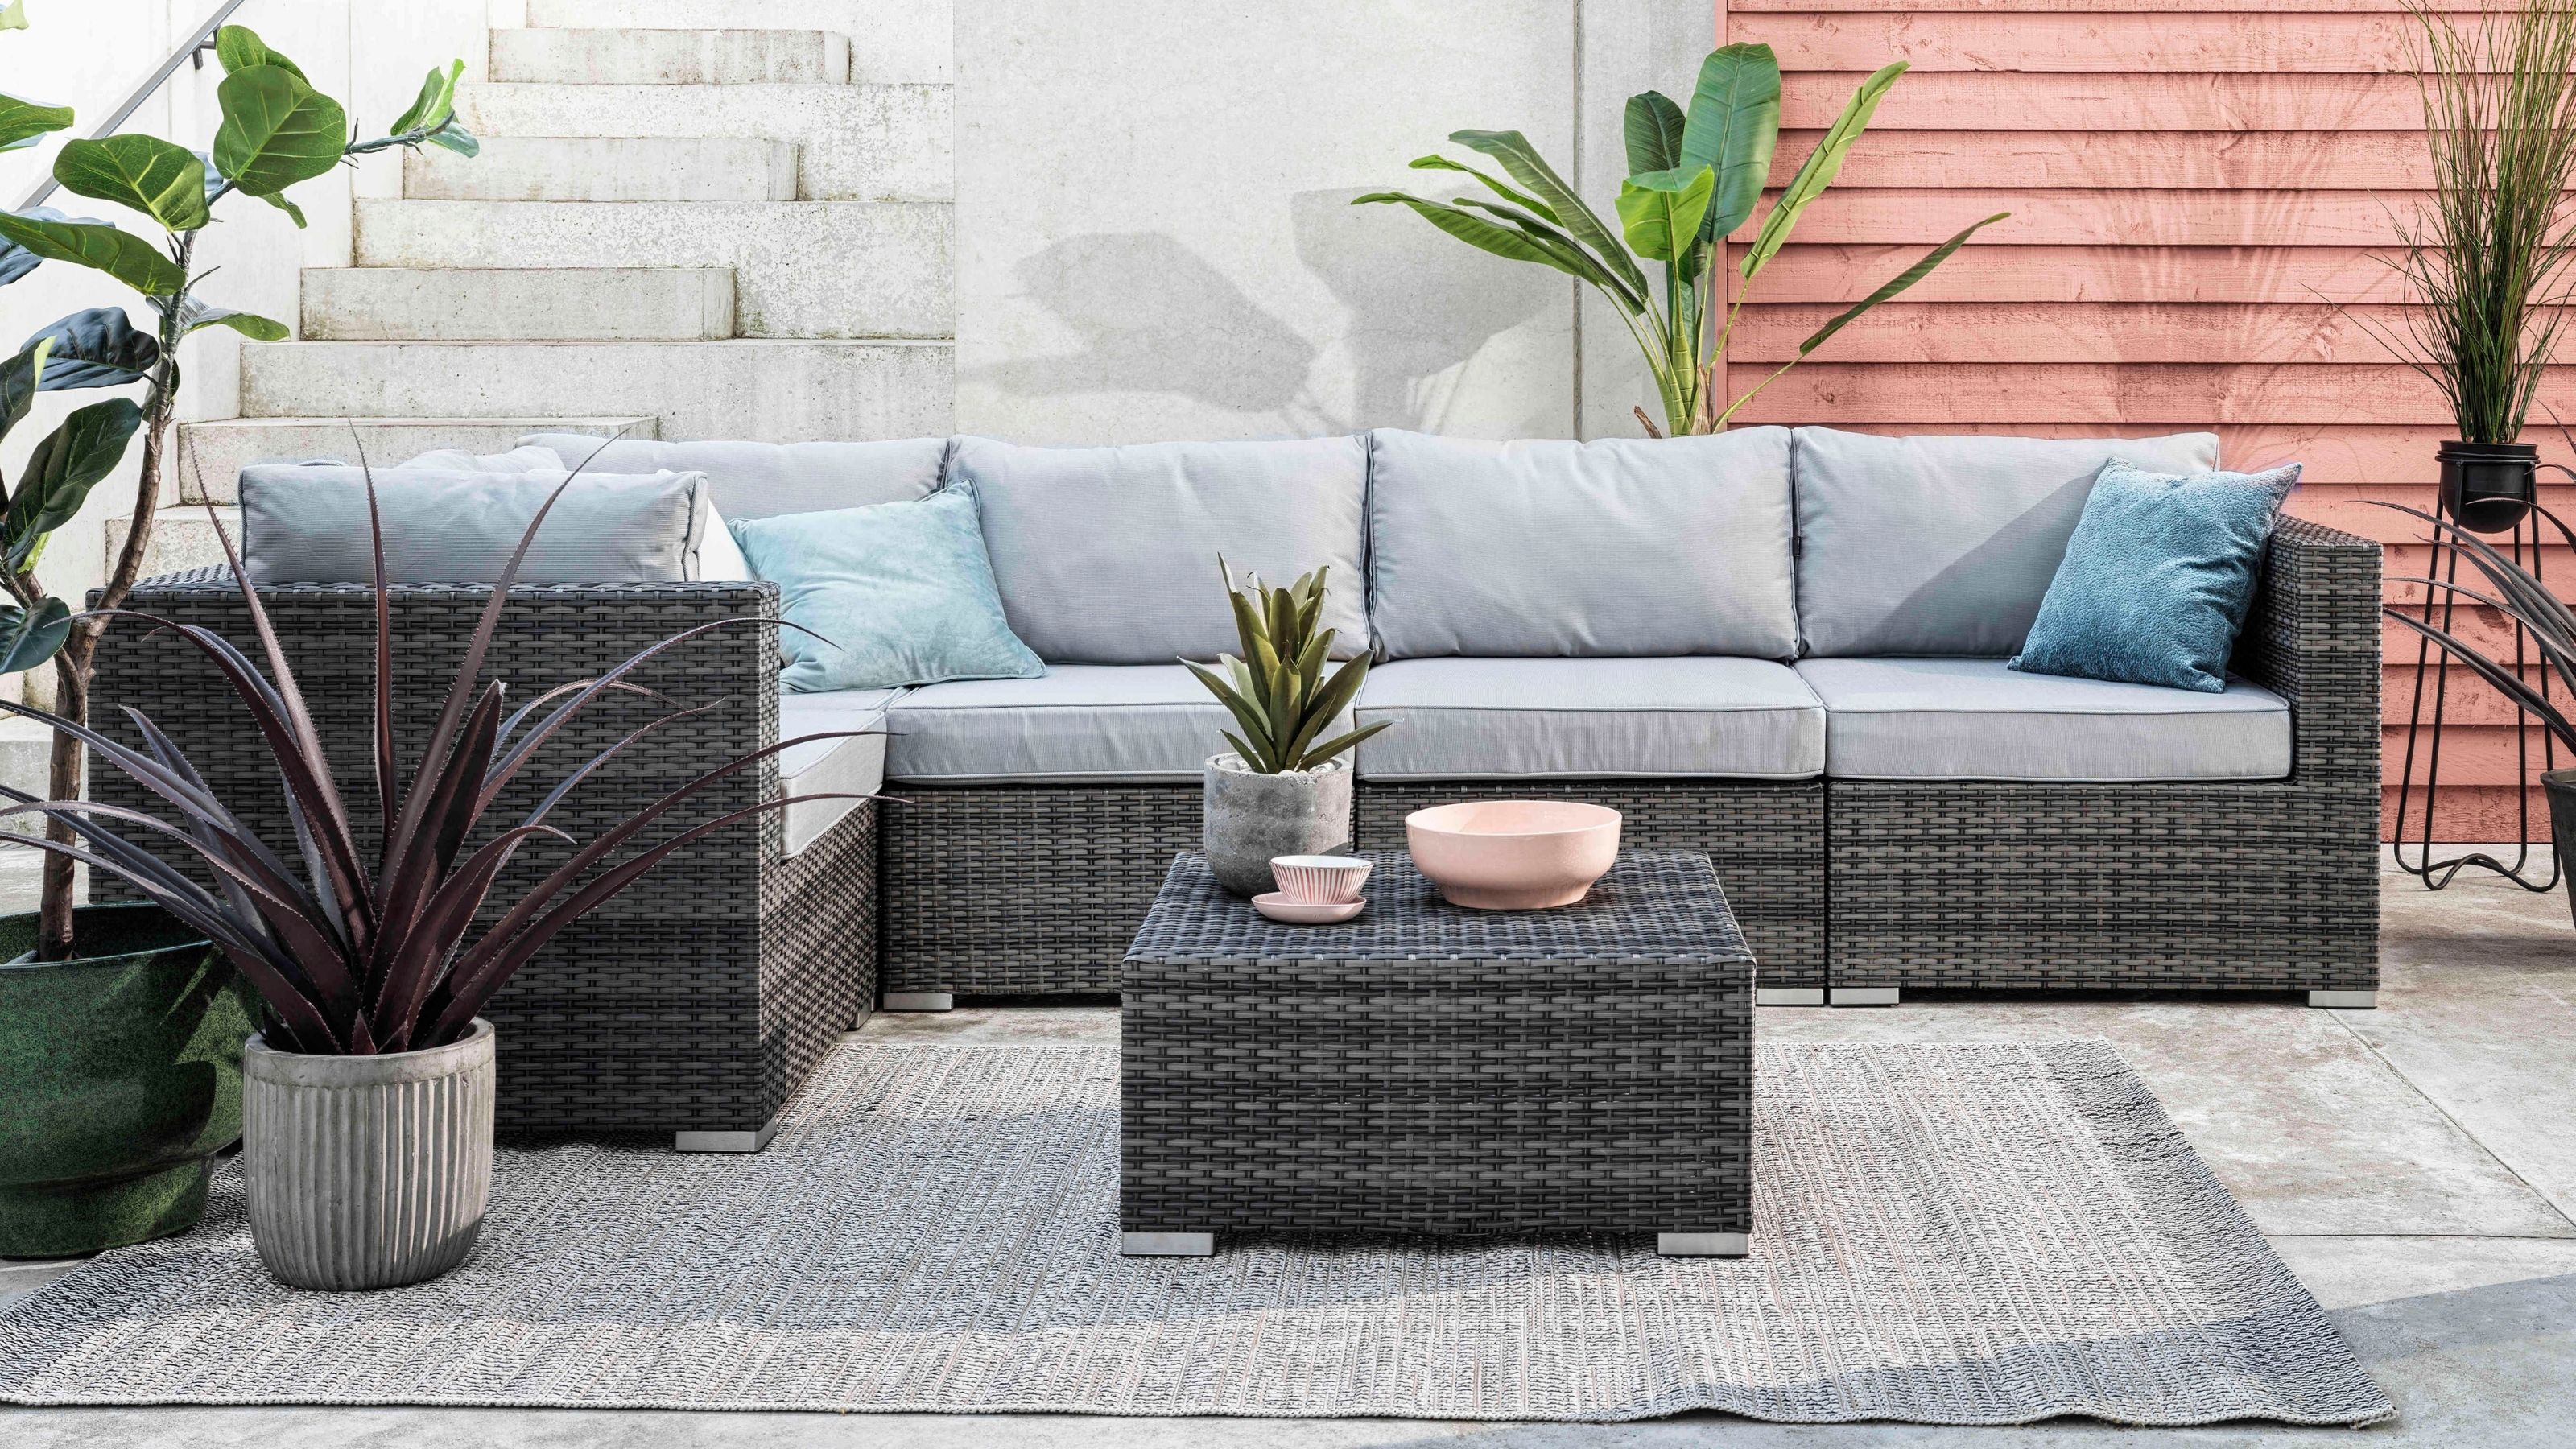 Best Rattan Garden Furniture 2021, Can Cane Furniture Be Left Outside